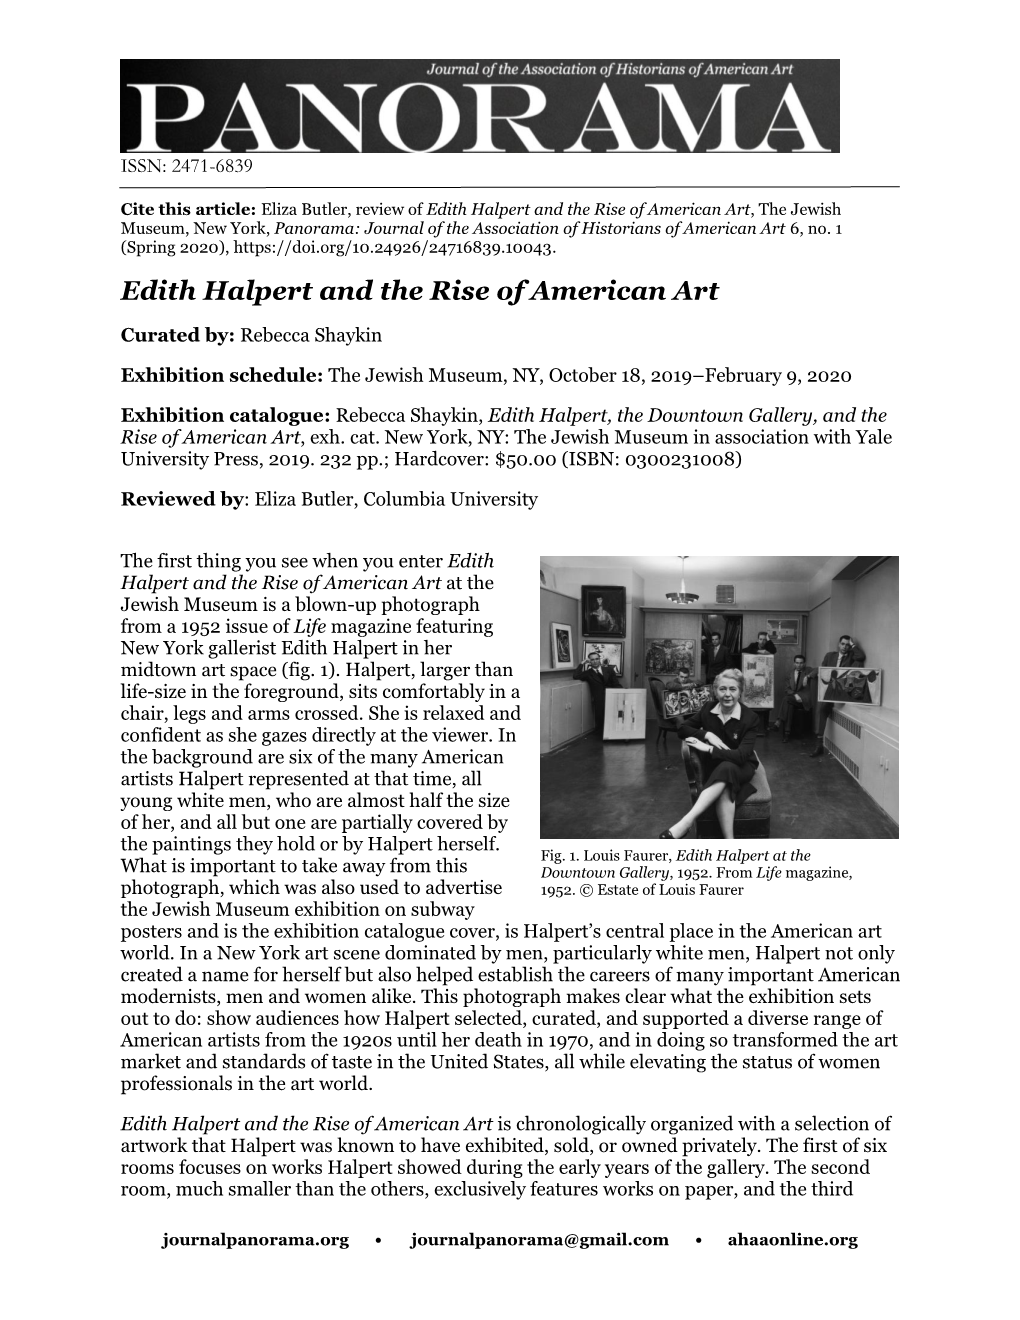 Butler, Review of Edith Halpert and the Rise of American Art, the Jewish Museum, New York, Panorama: Journal of the Association of Historians of American Art 6, No